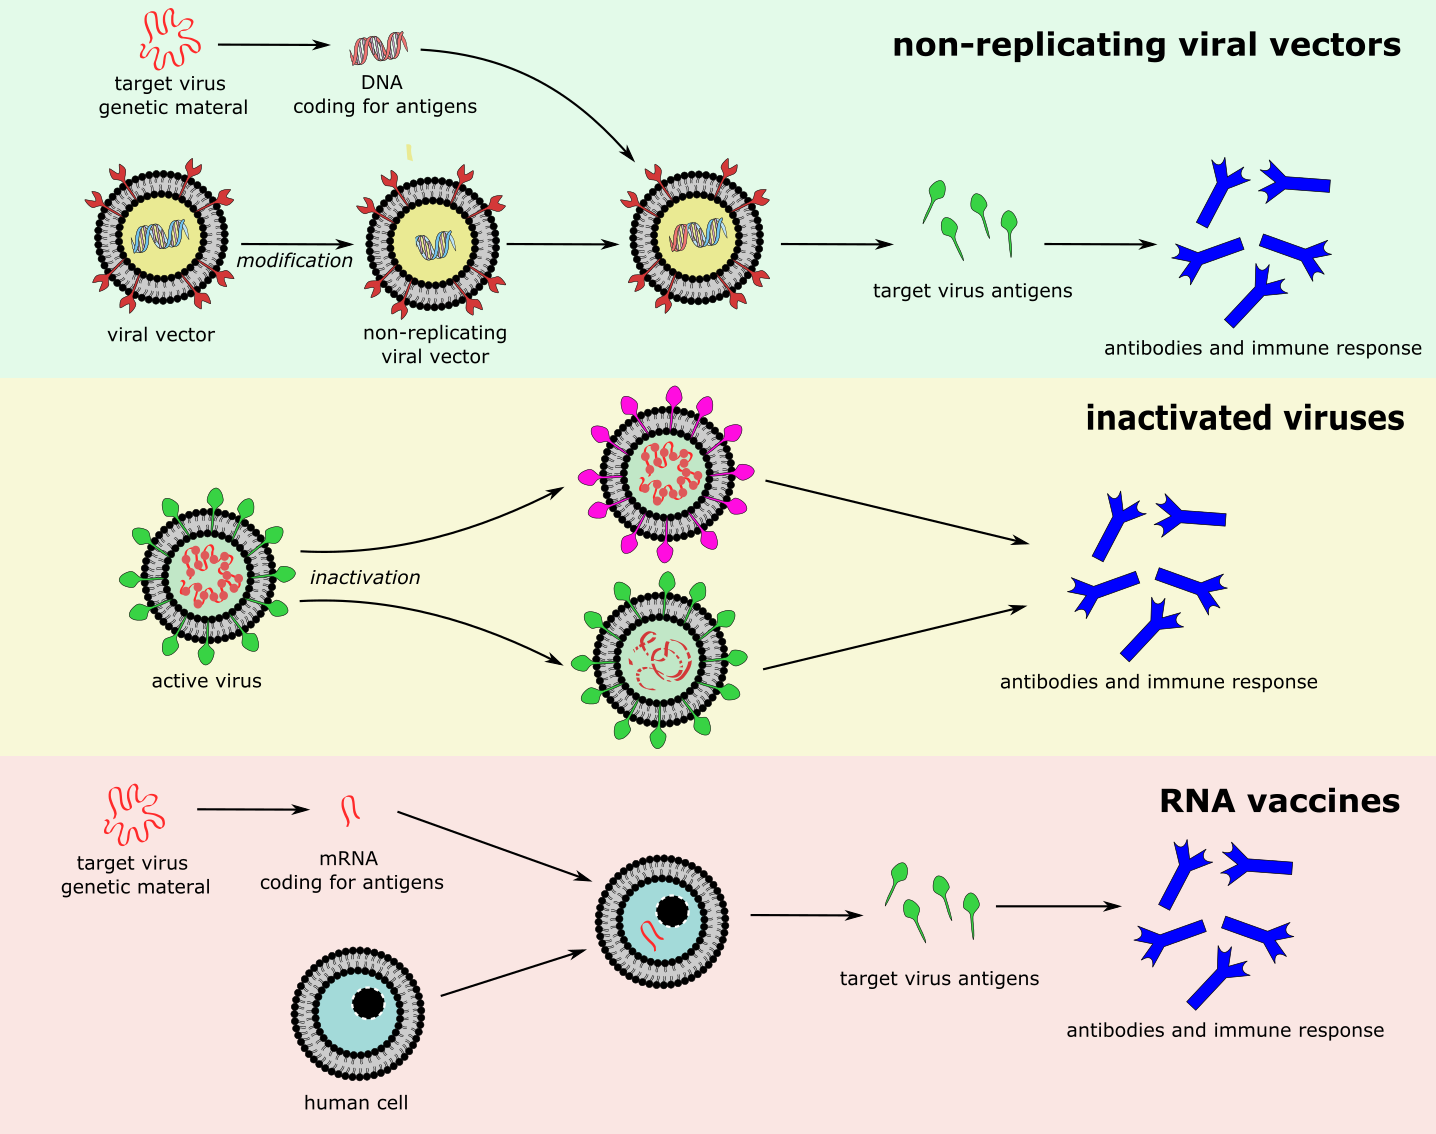 Top: non-replicating viral vectors; middle: inactivated viruses; bottom: RN...